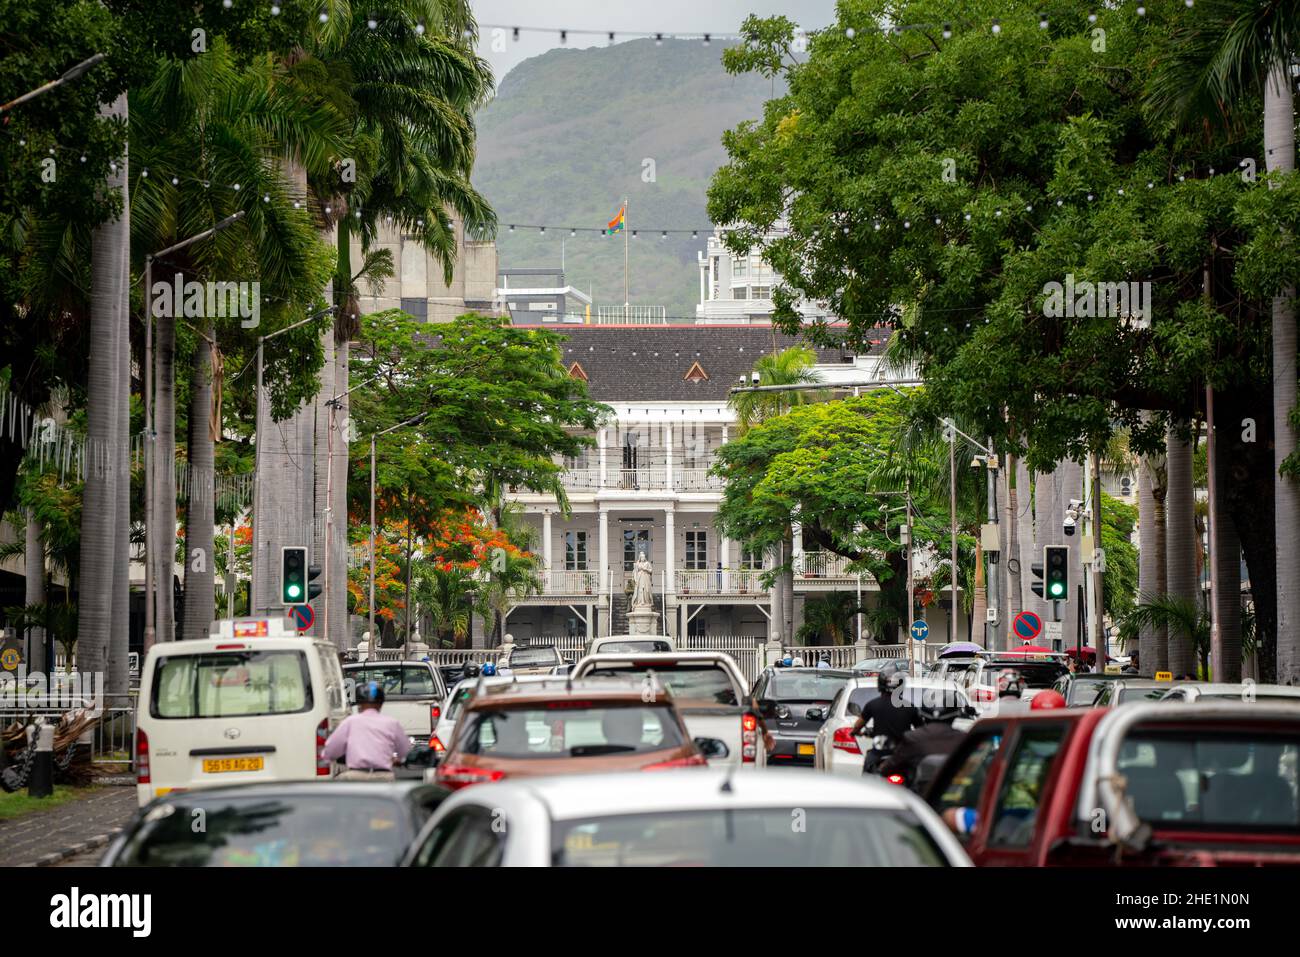 Government House in Port Louis, the capital city of Mauritius. Built by the French in a colonial style, the British put up a statue of Queen Victoria Stock Photo